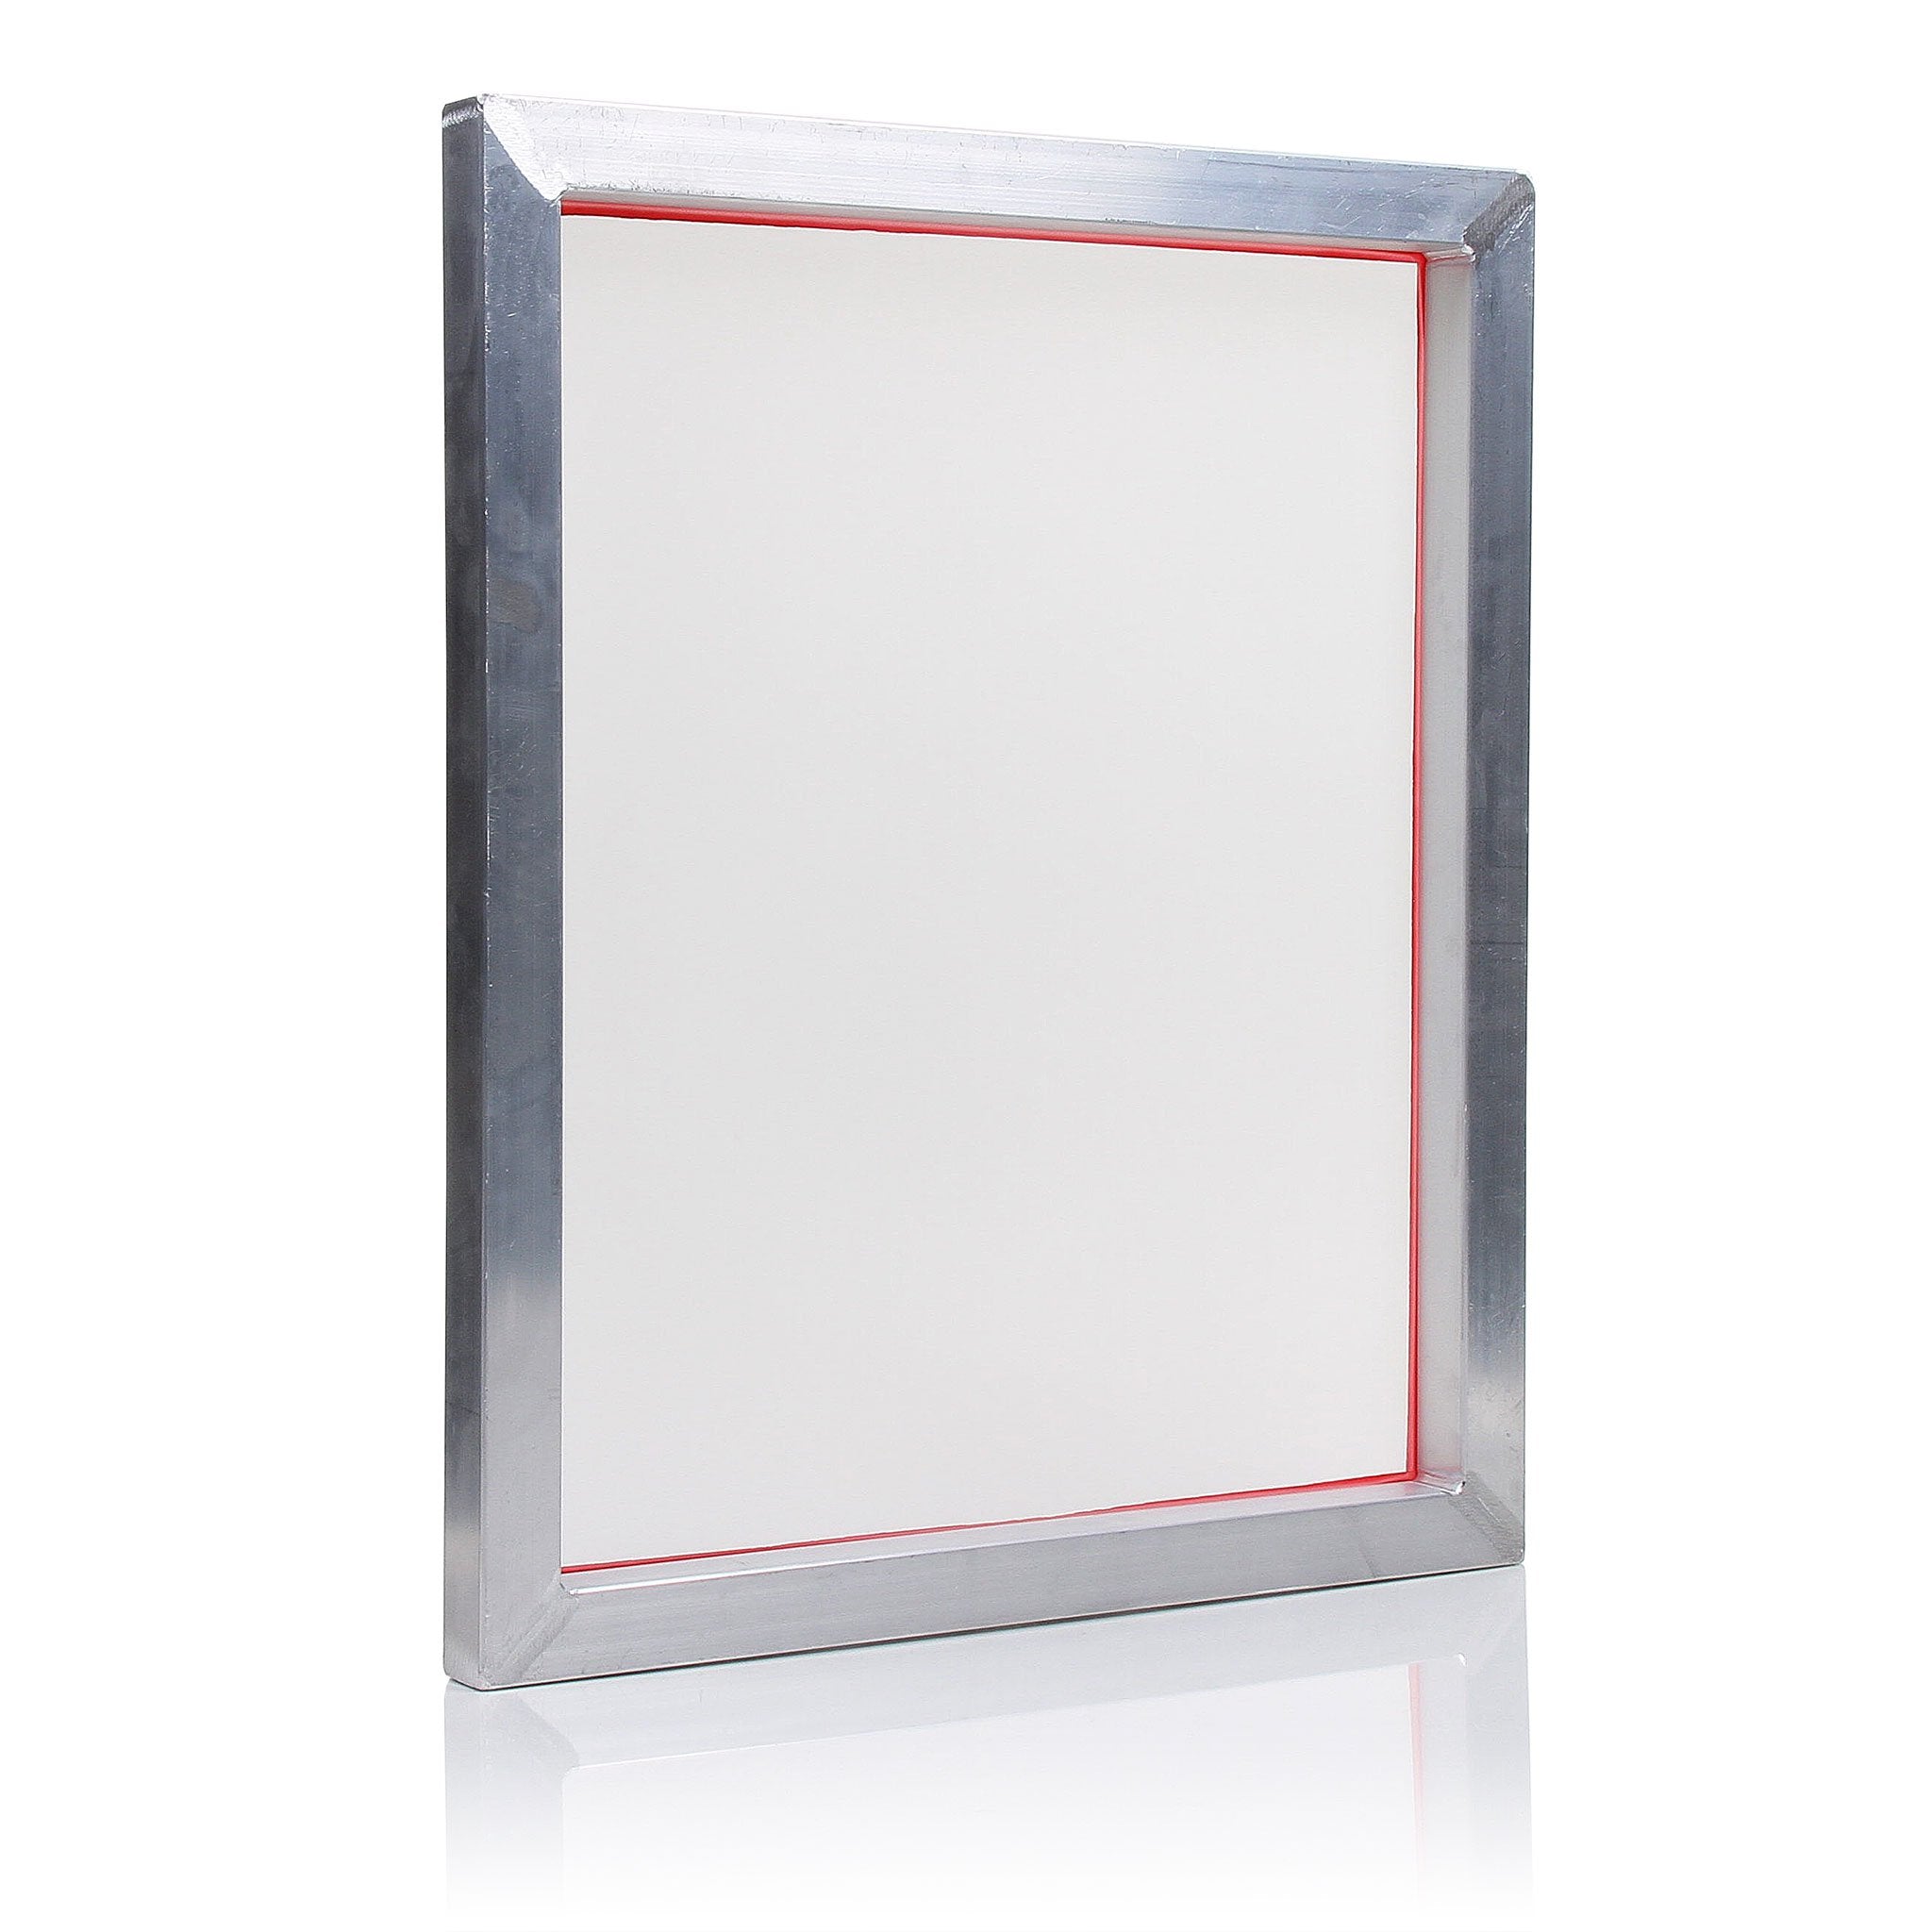 20 x 24 Inch Pre-Stretched Aluminum Silk Screen Printing Frames with 60 White Mesh 2 Pack Screens 